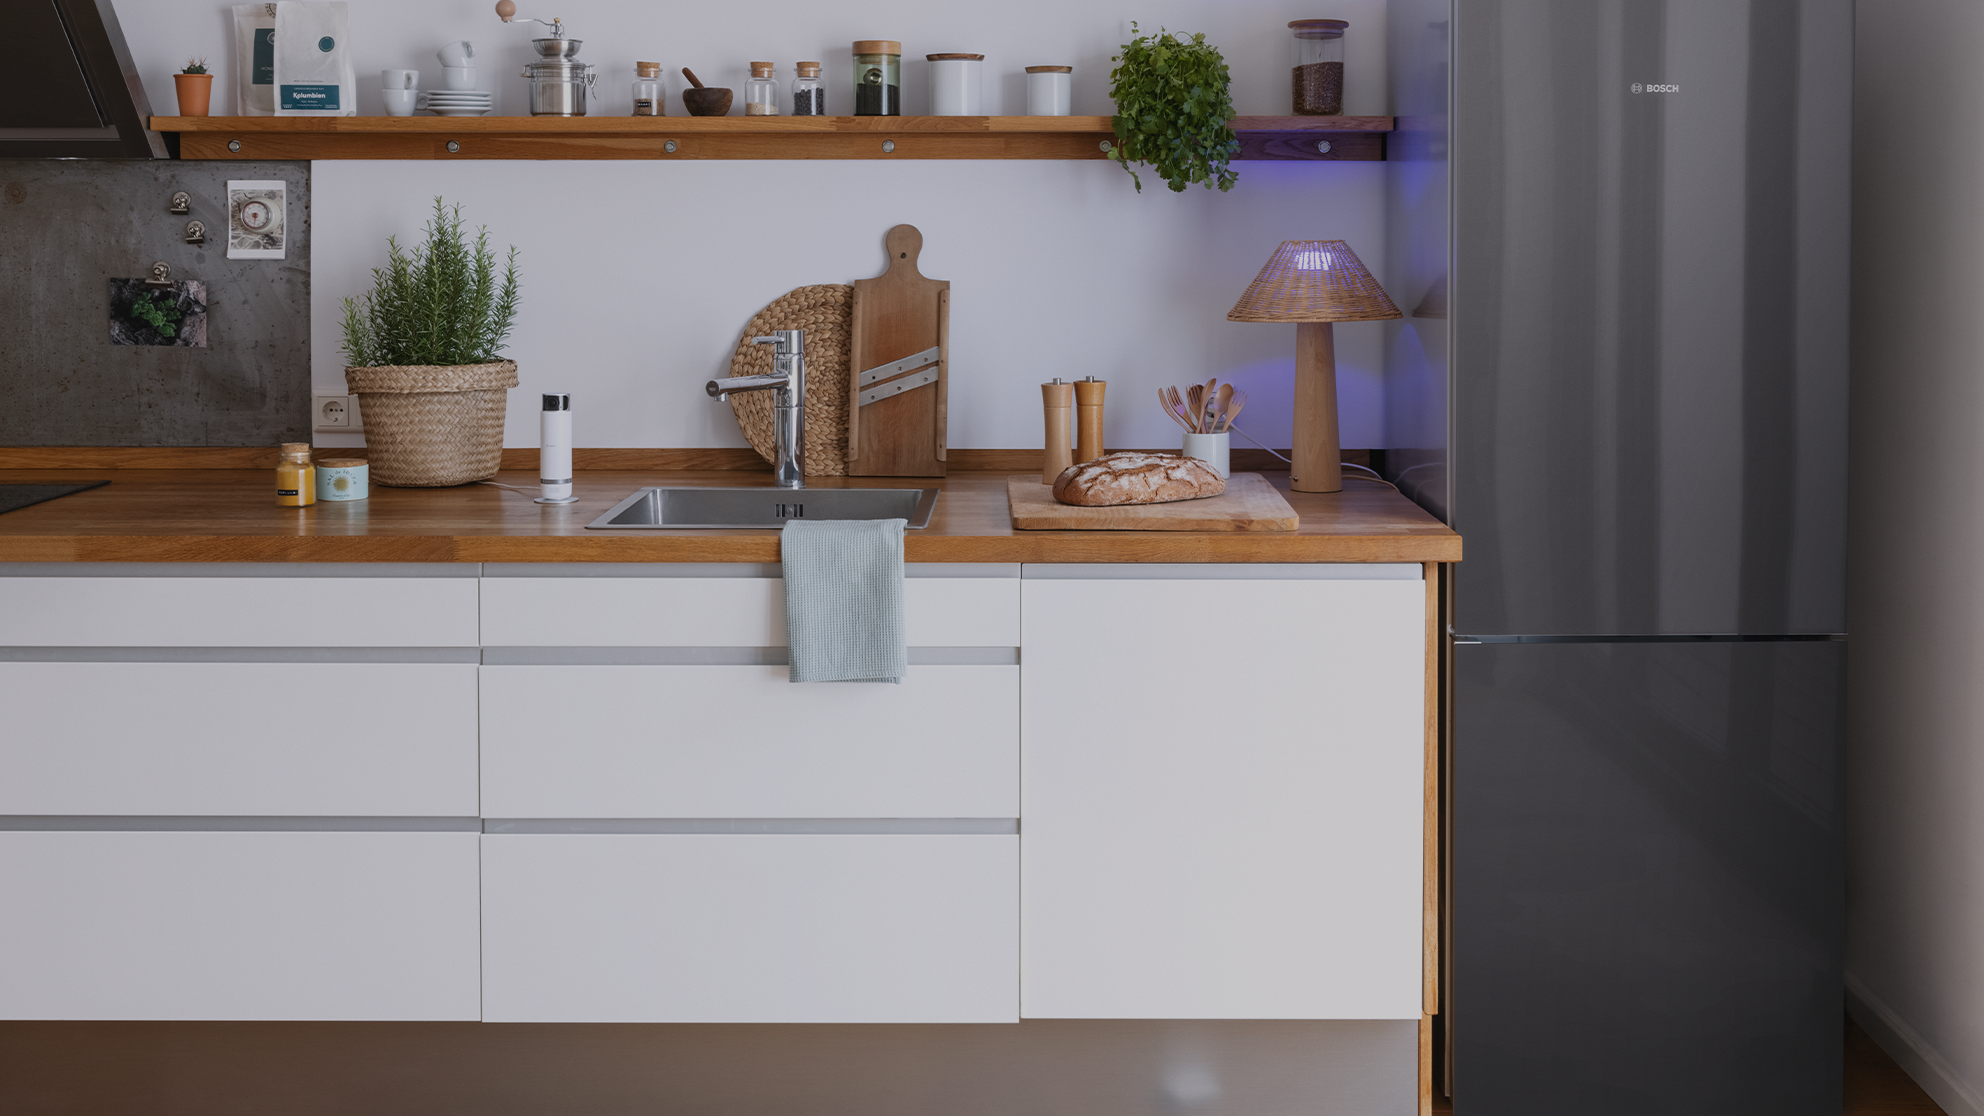 https://www.bosch-smarthome.com/uk/media/content/05_partner/09_home_connect/0_stage_15/homeconnect_stage.png